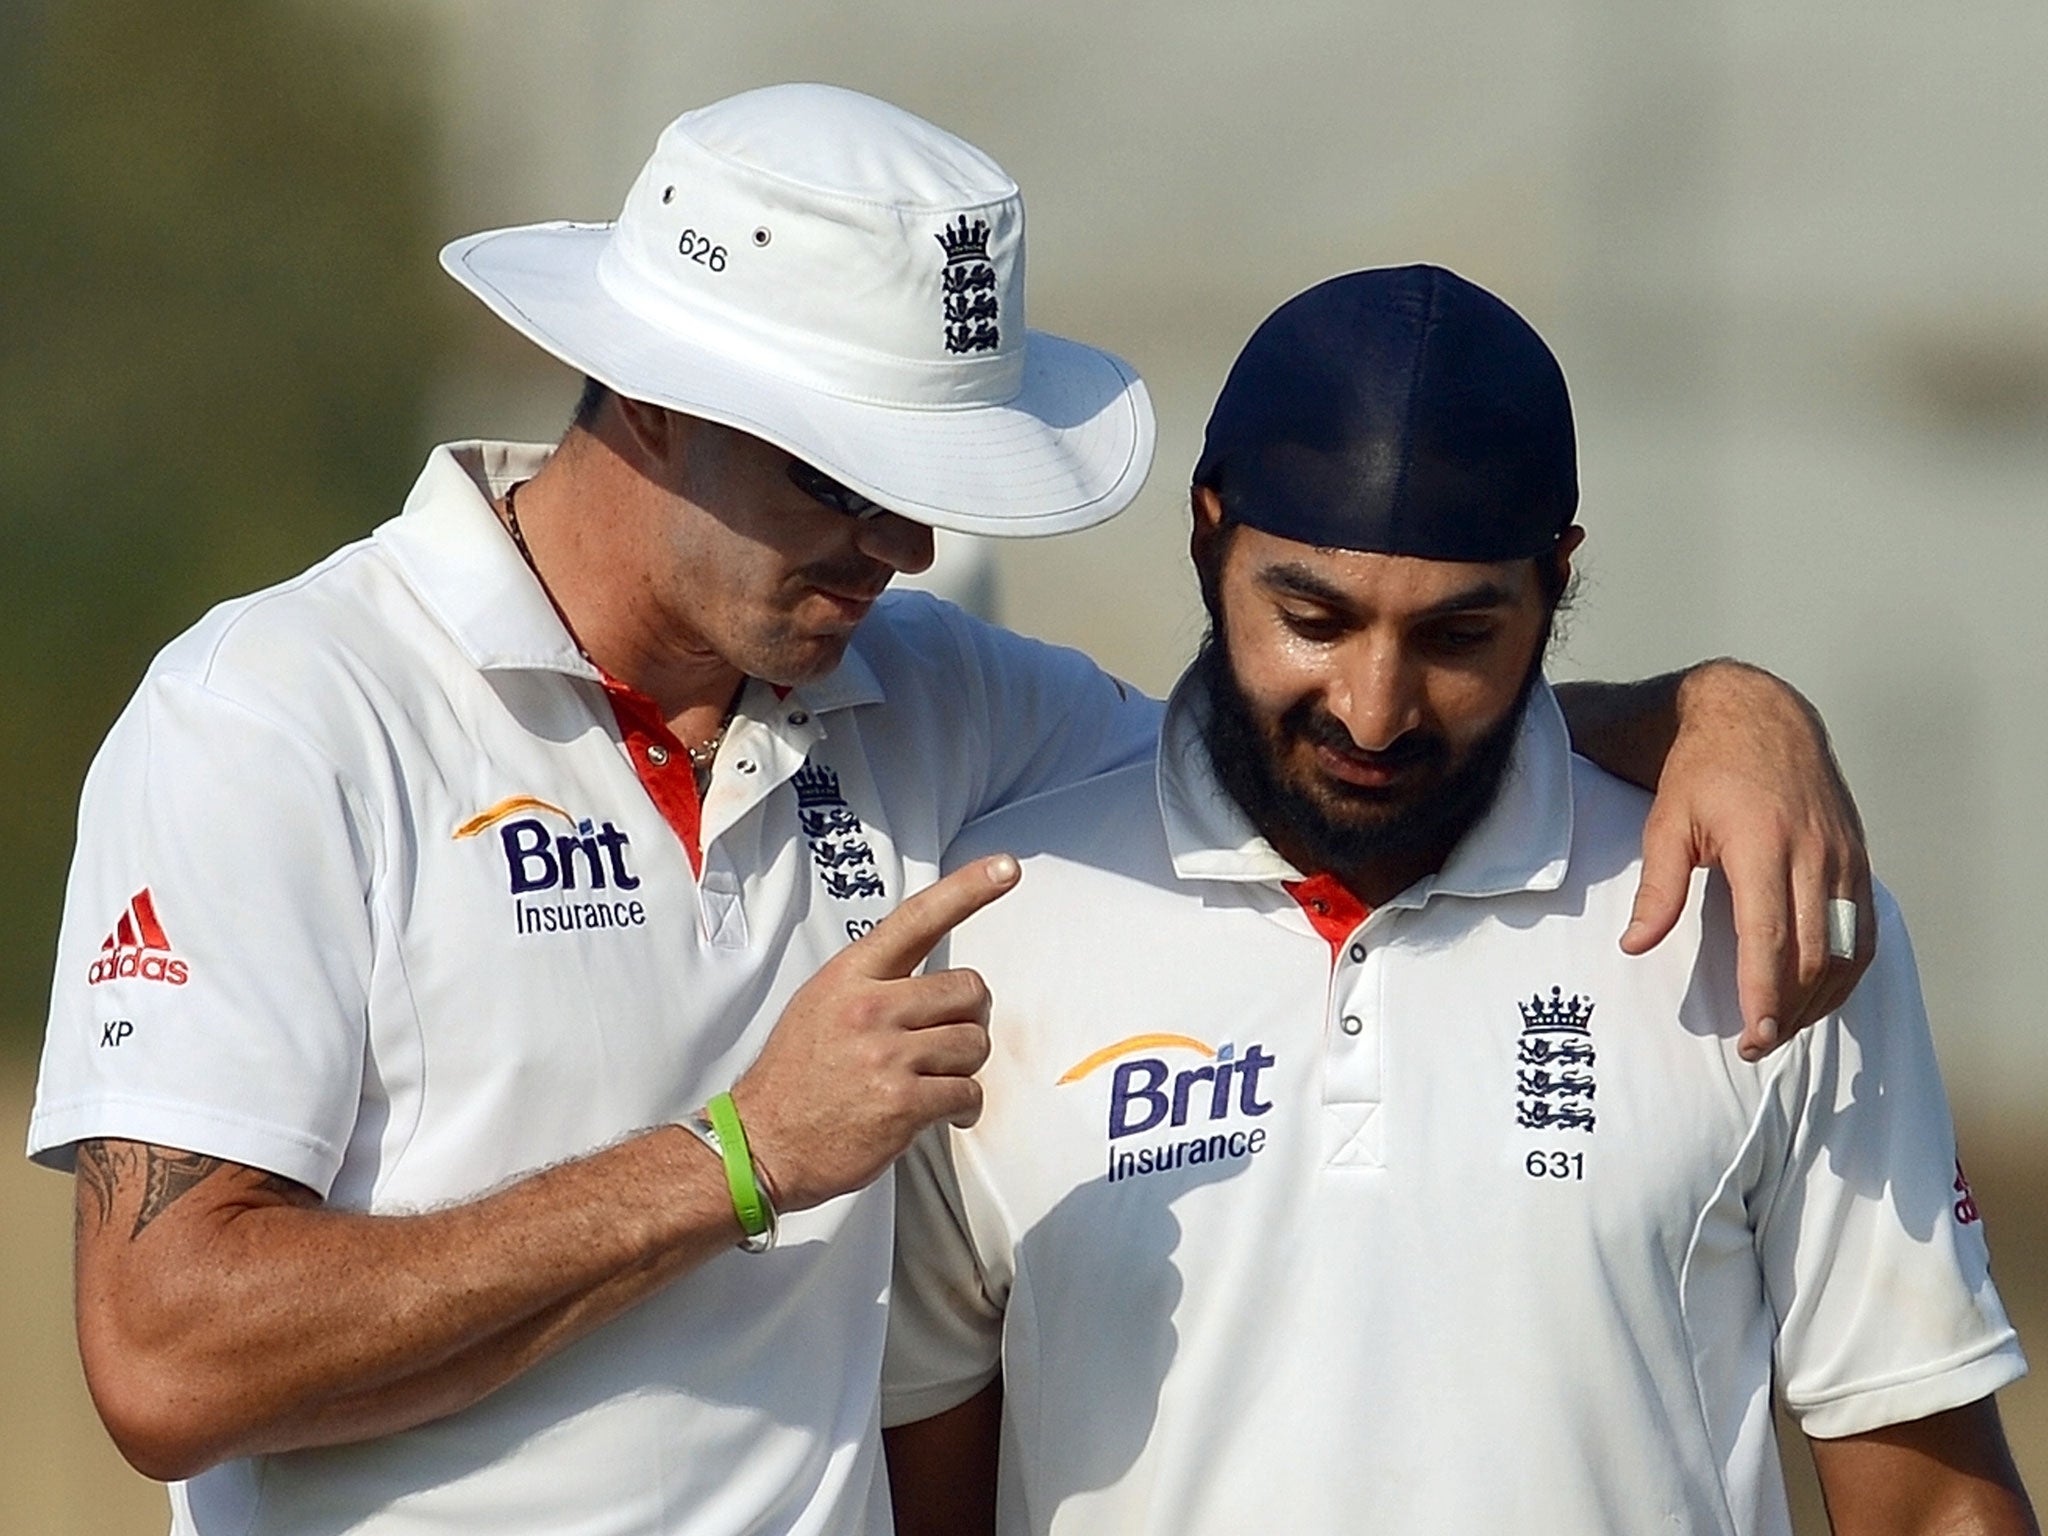 Kevin Pietersen and Monty Panesar - photo not from current game due to licensing issues